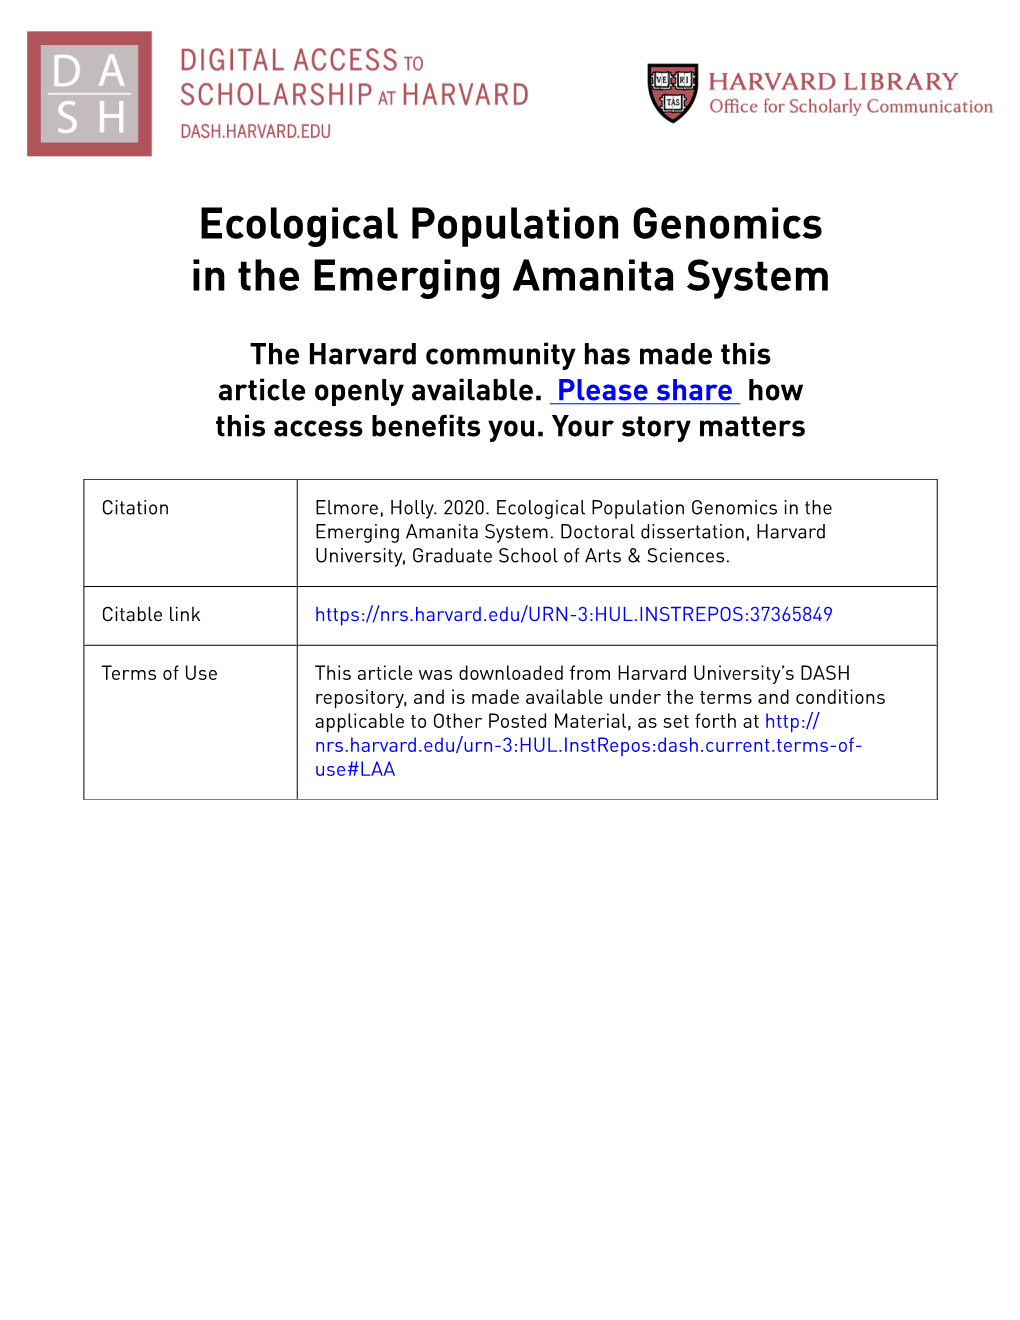 Ecological Population Genomics in the Emerging Amanita System